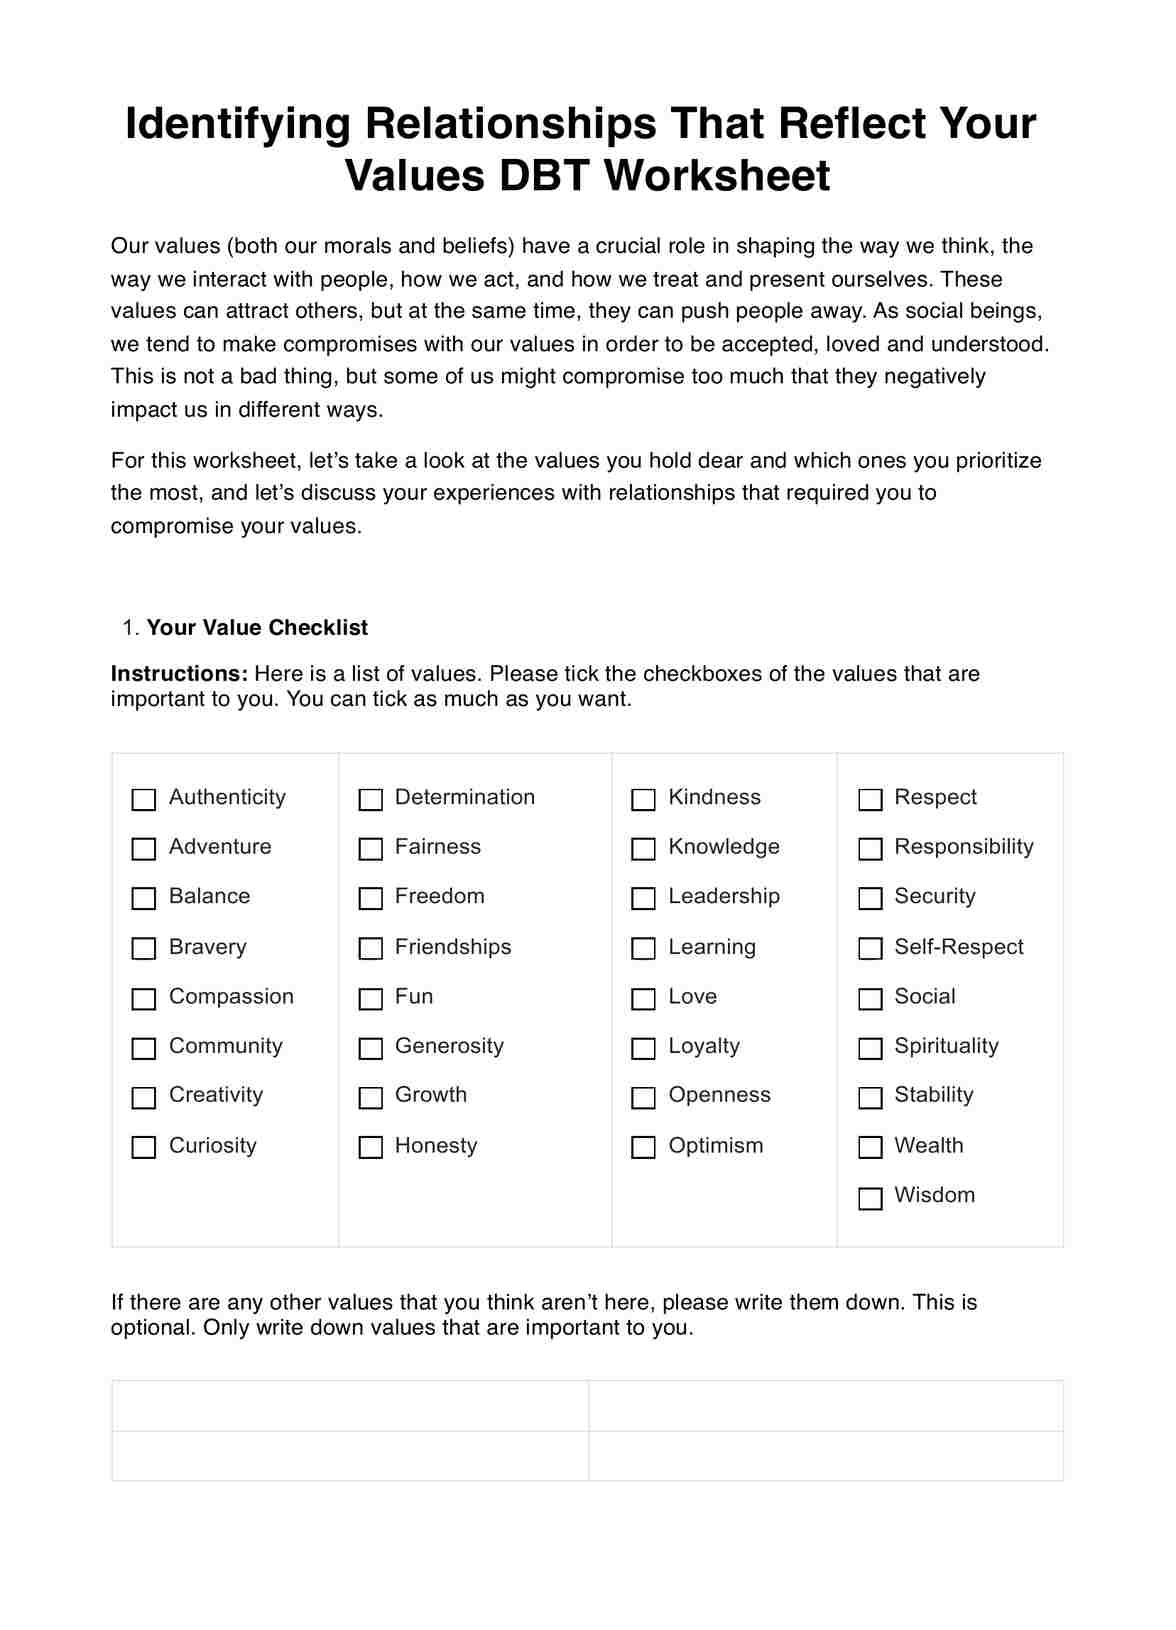 Identifying Relationships That Reflect Your Values DBT Worksheet PDF Example